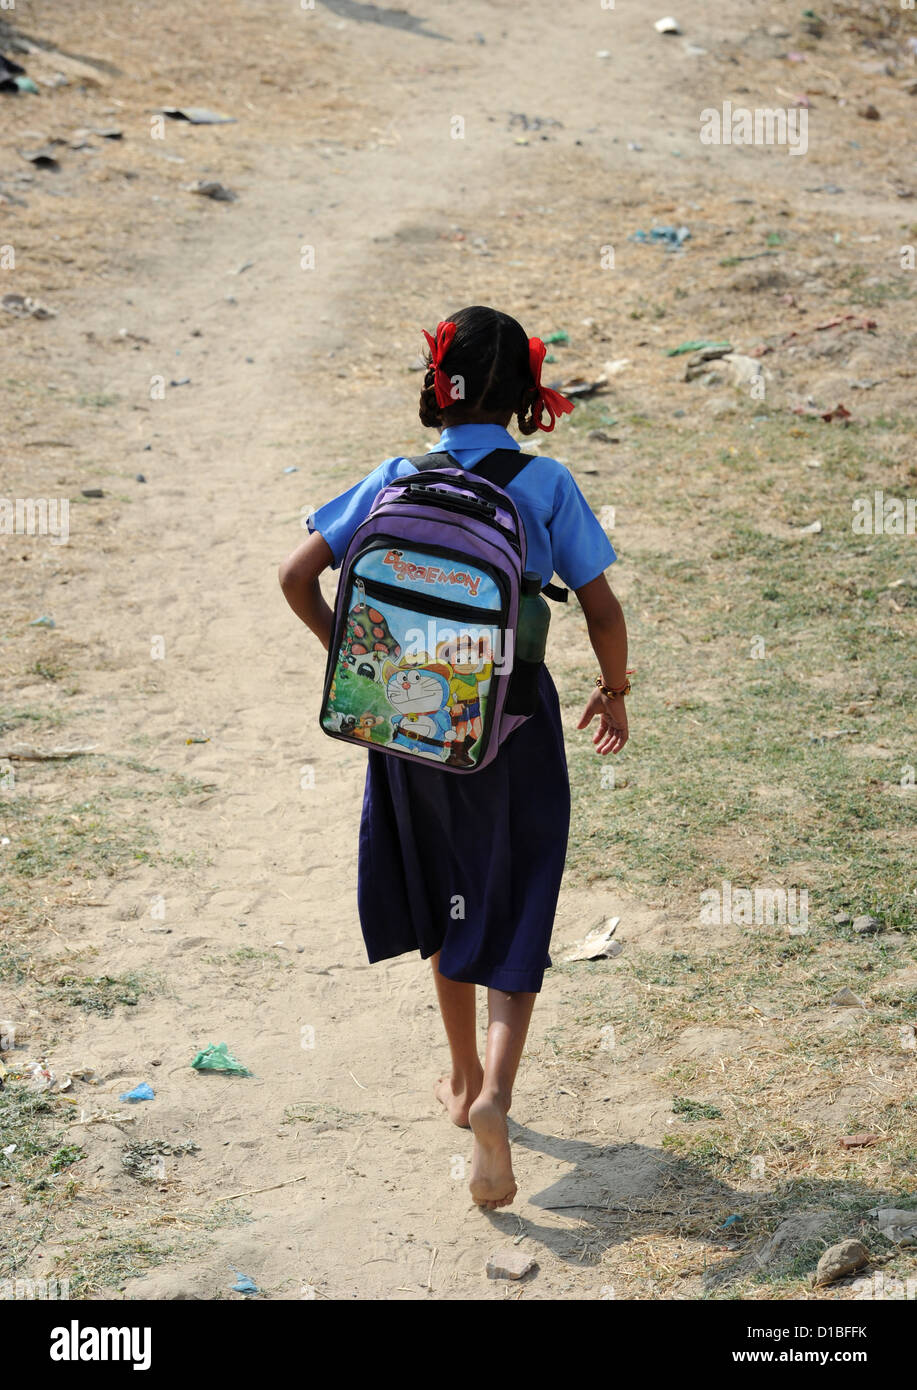 A student of the girls' school in Mundia walks barefoot to school,in Mundia near Jaipur, India, 19 November 2012. The school is supported by means of the German development association 'Mädchenschule Mundia' (Girls' School Mundia), which is based in Monheim, Germany, and by Indian travel agent Bahadur Singh Rajawat. It is still in the construction phase. Photo: Jens Kalaene Stock Photo